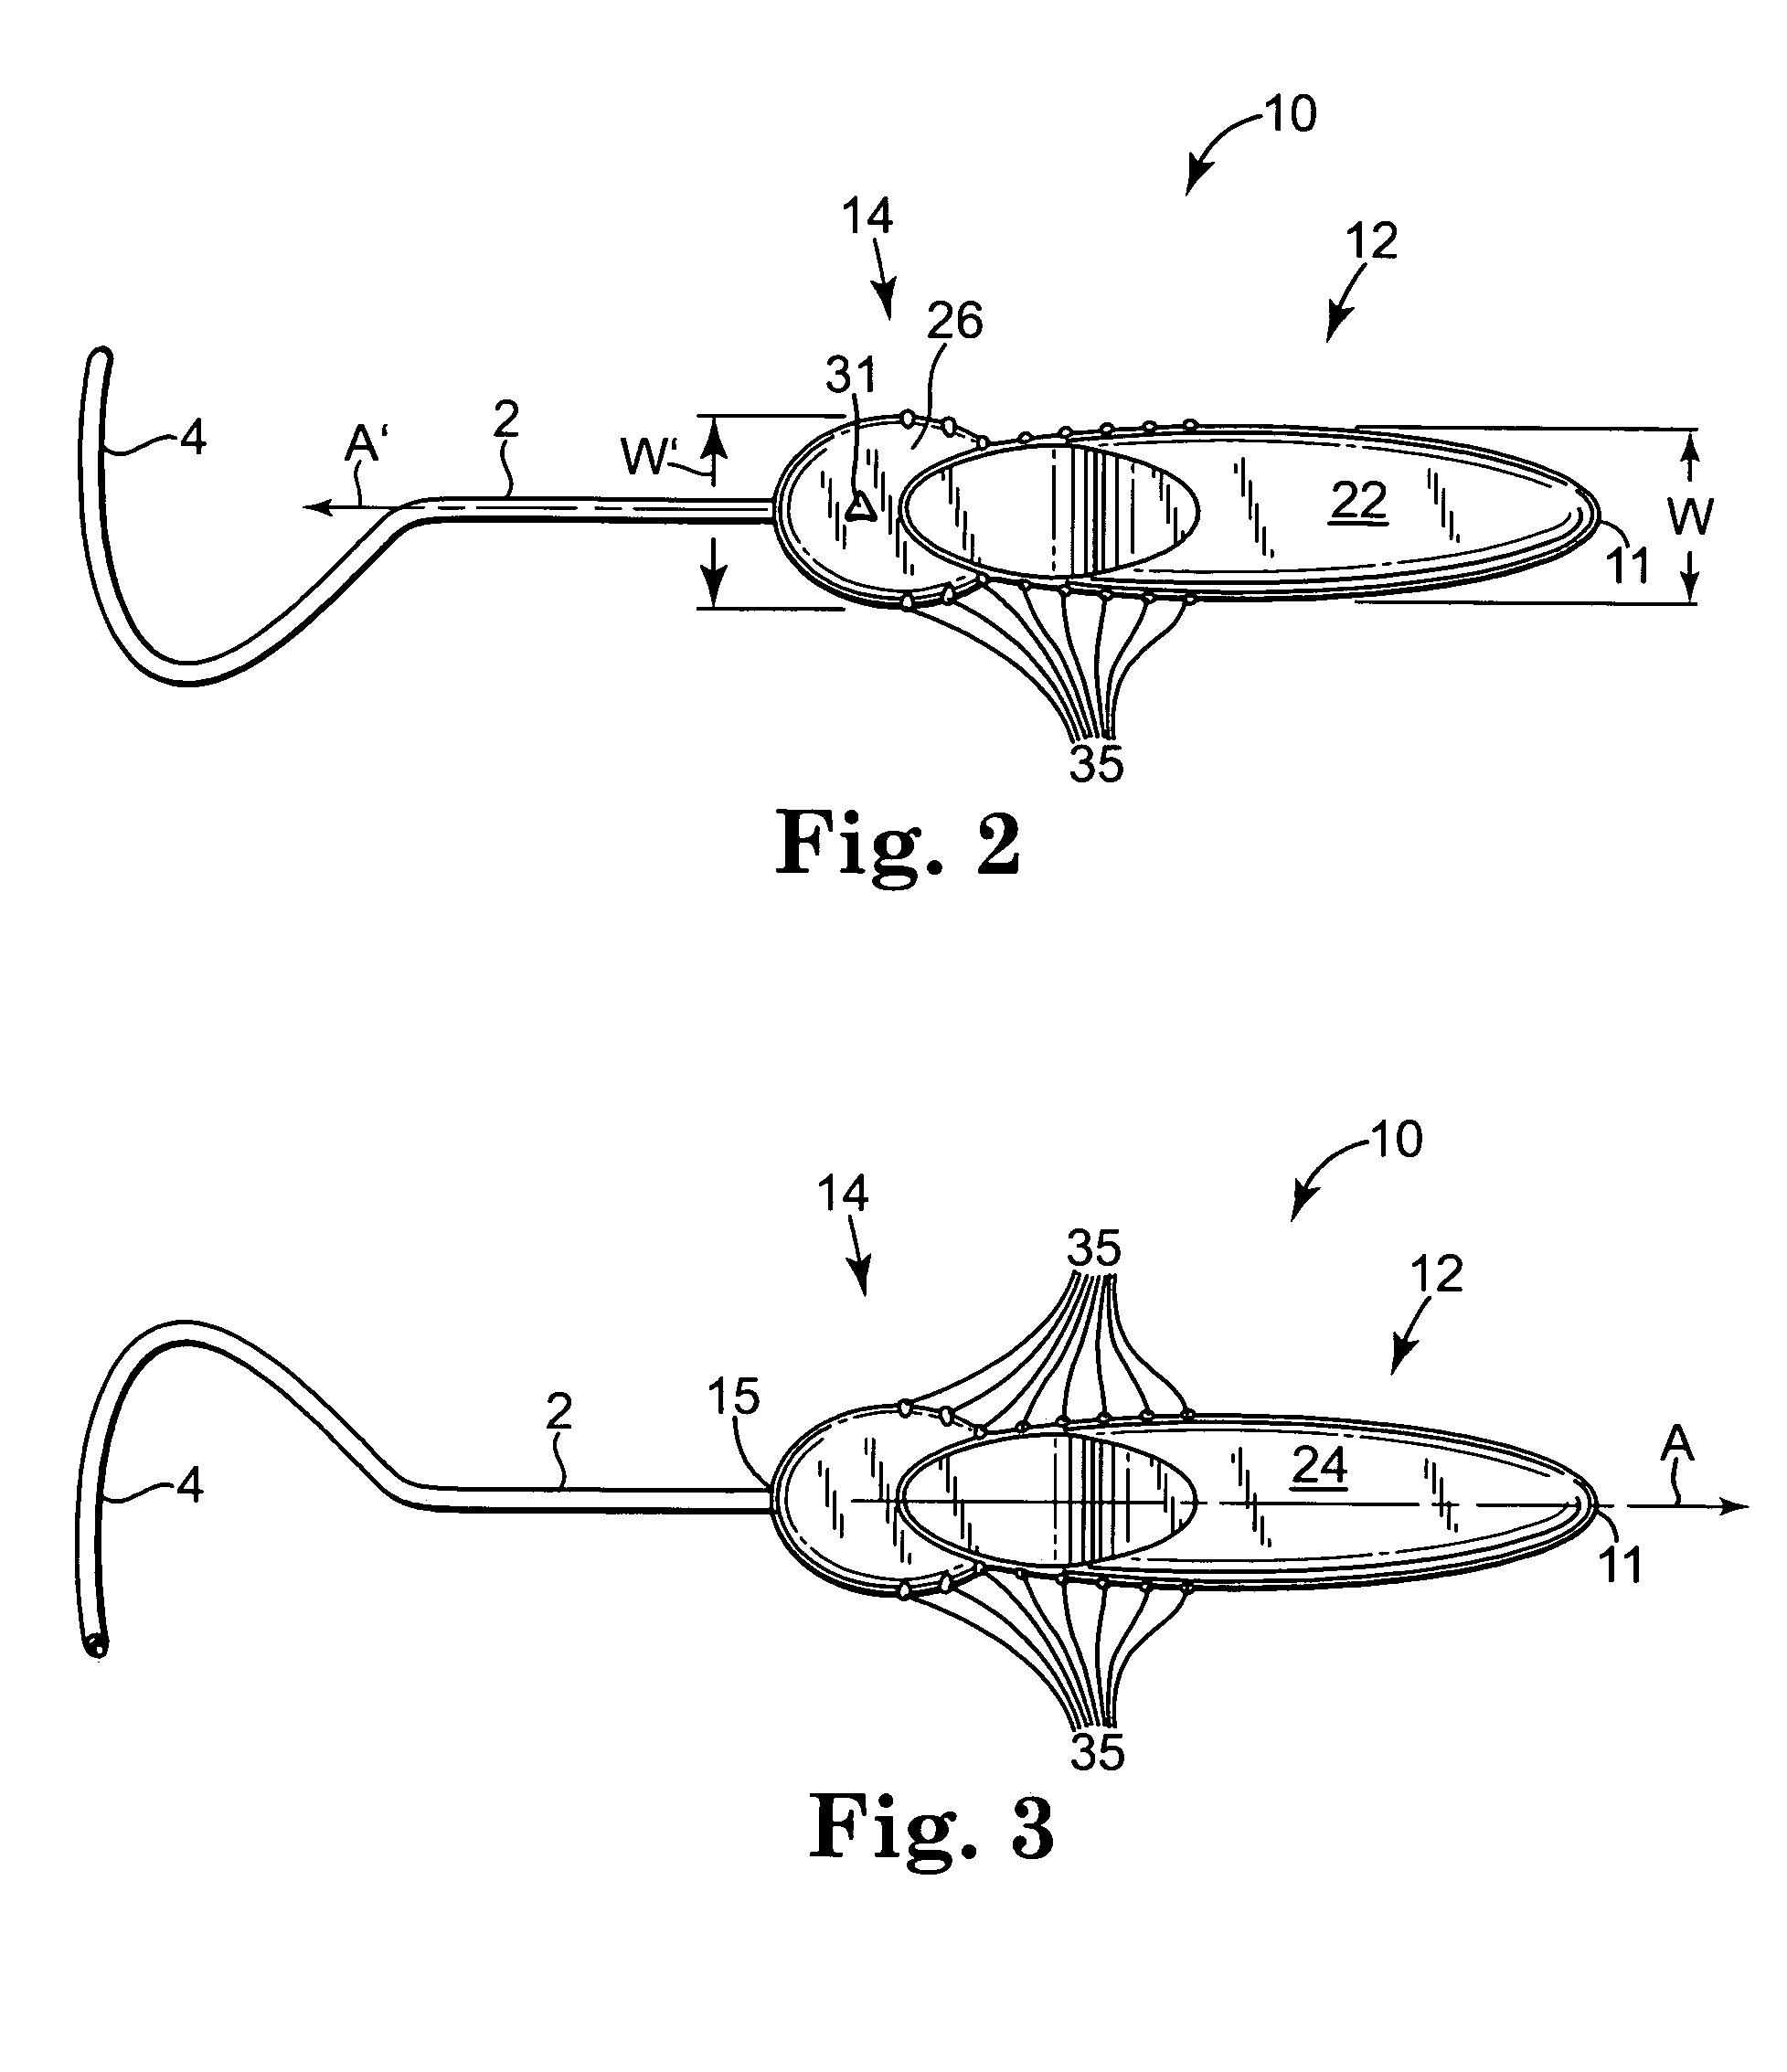 Handle and surgical article